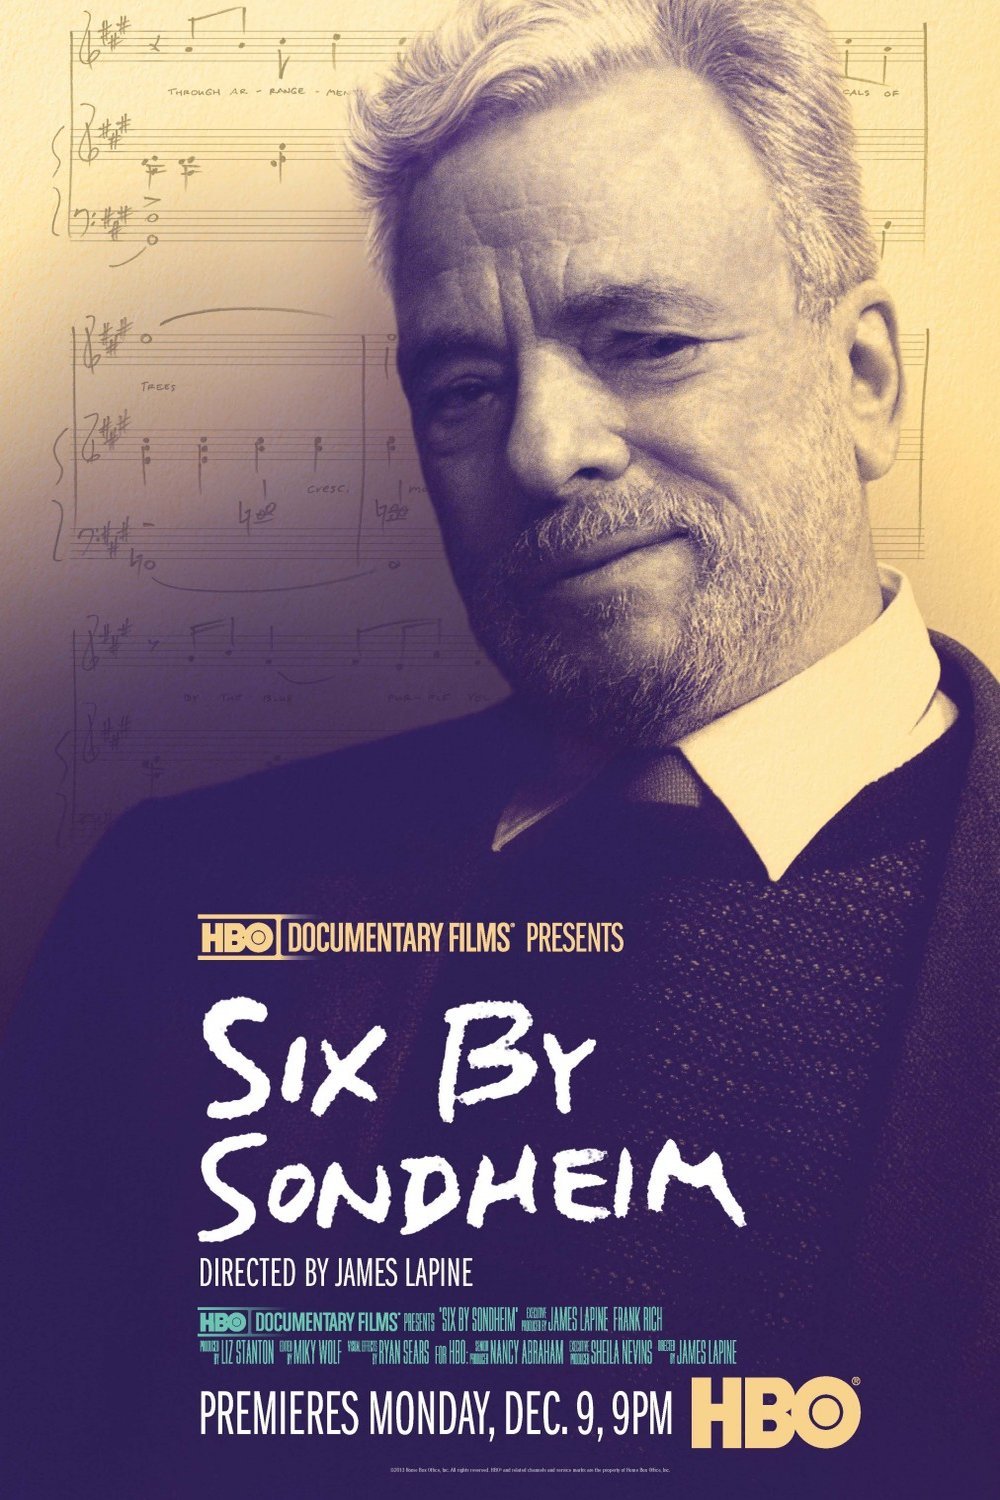 Poster of the movie Six by Sondheim